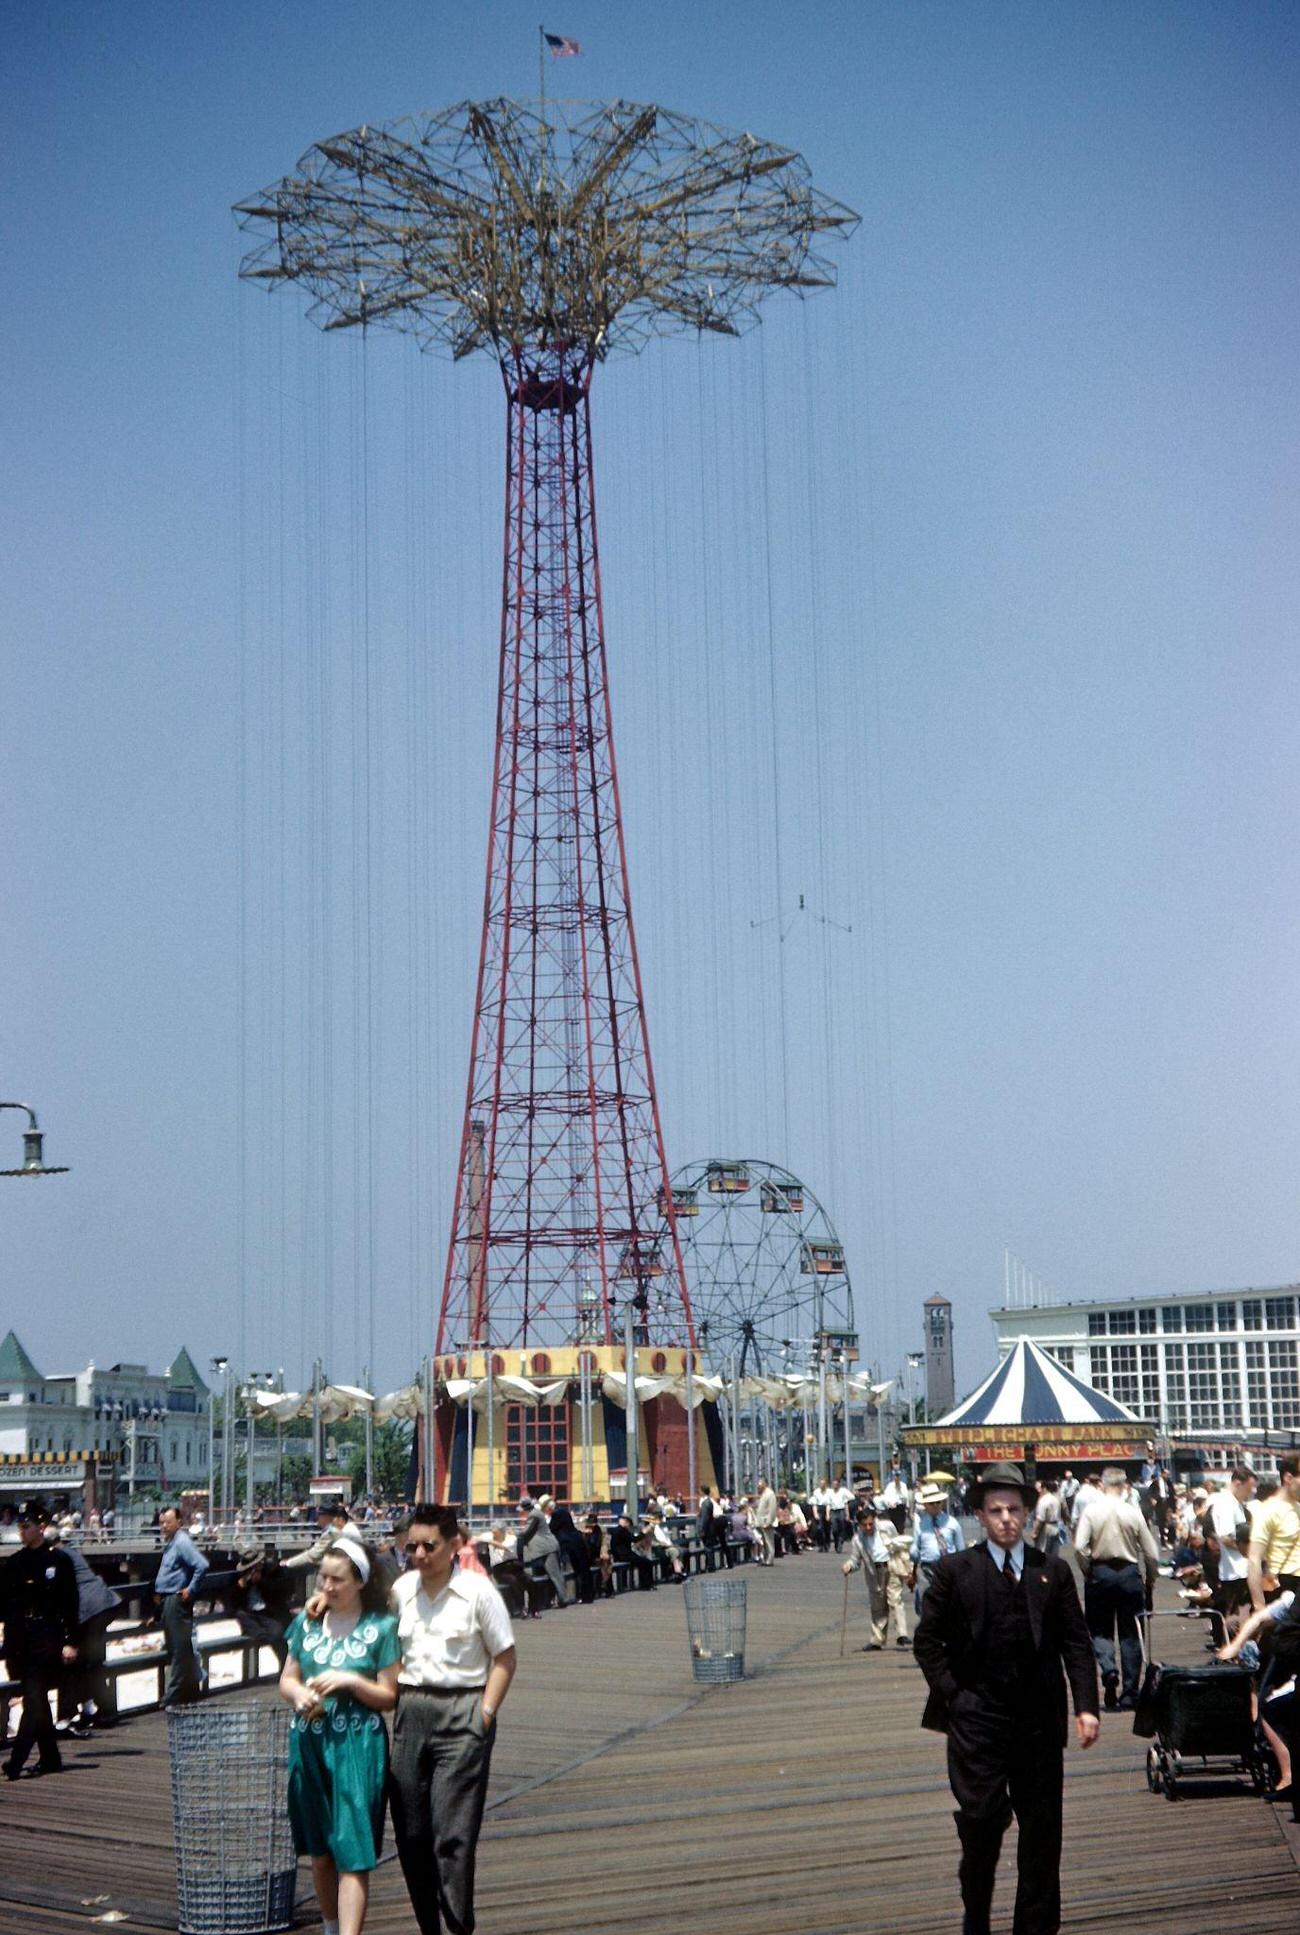 Coney Island Boardwalk And The Famous Parachute Jump In Steeplechase Park, 1948